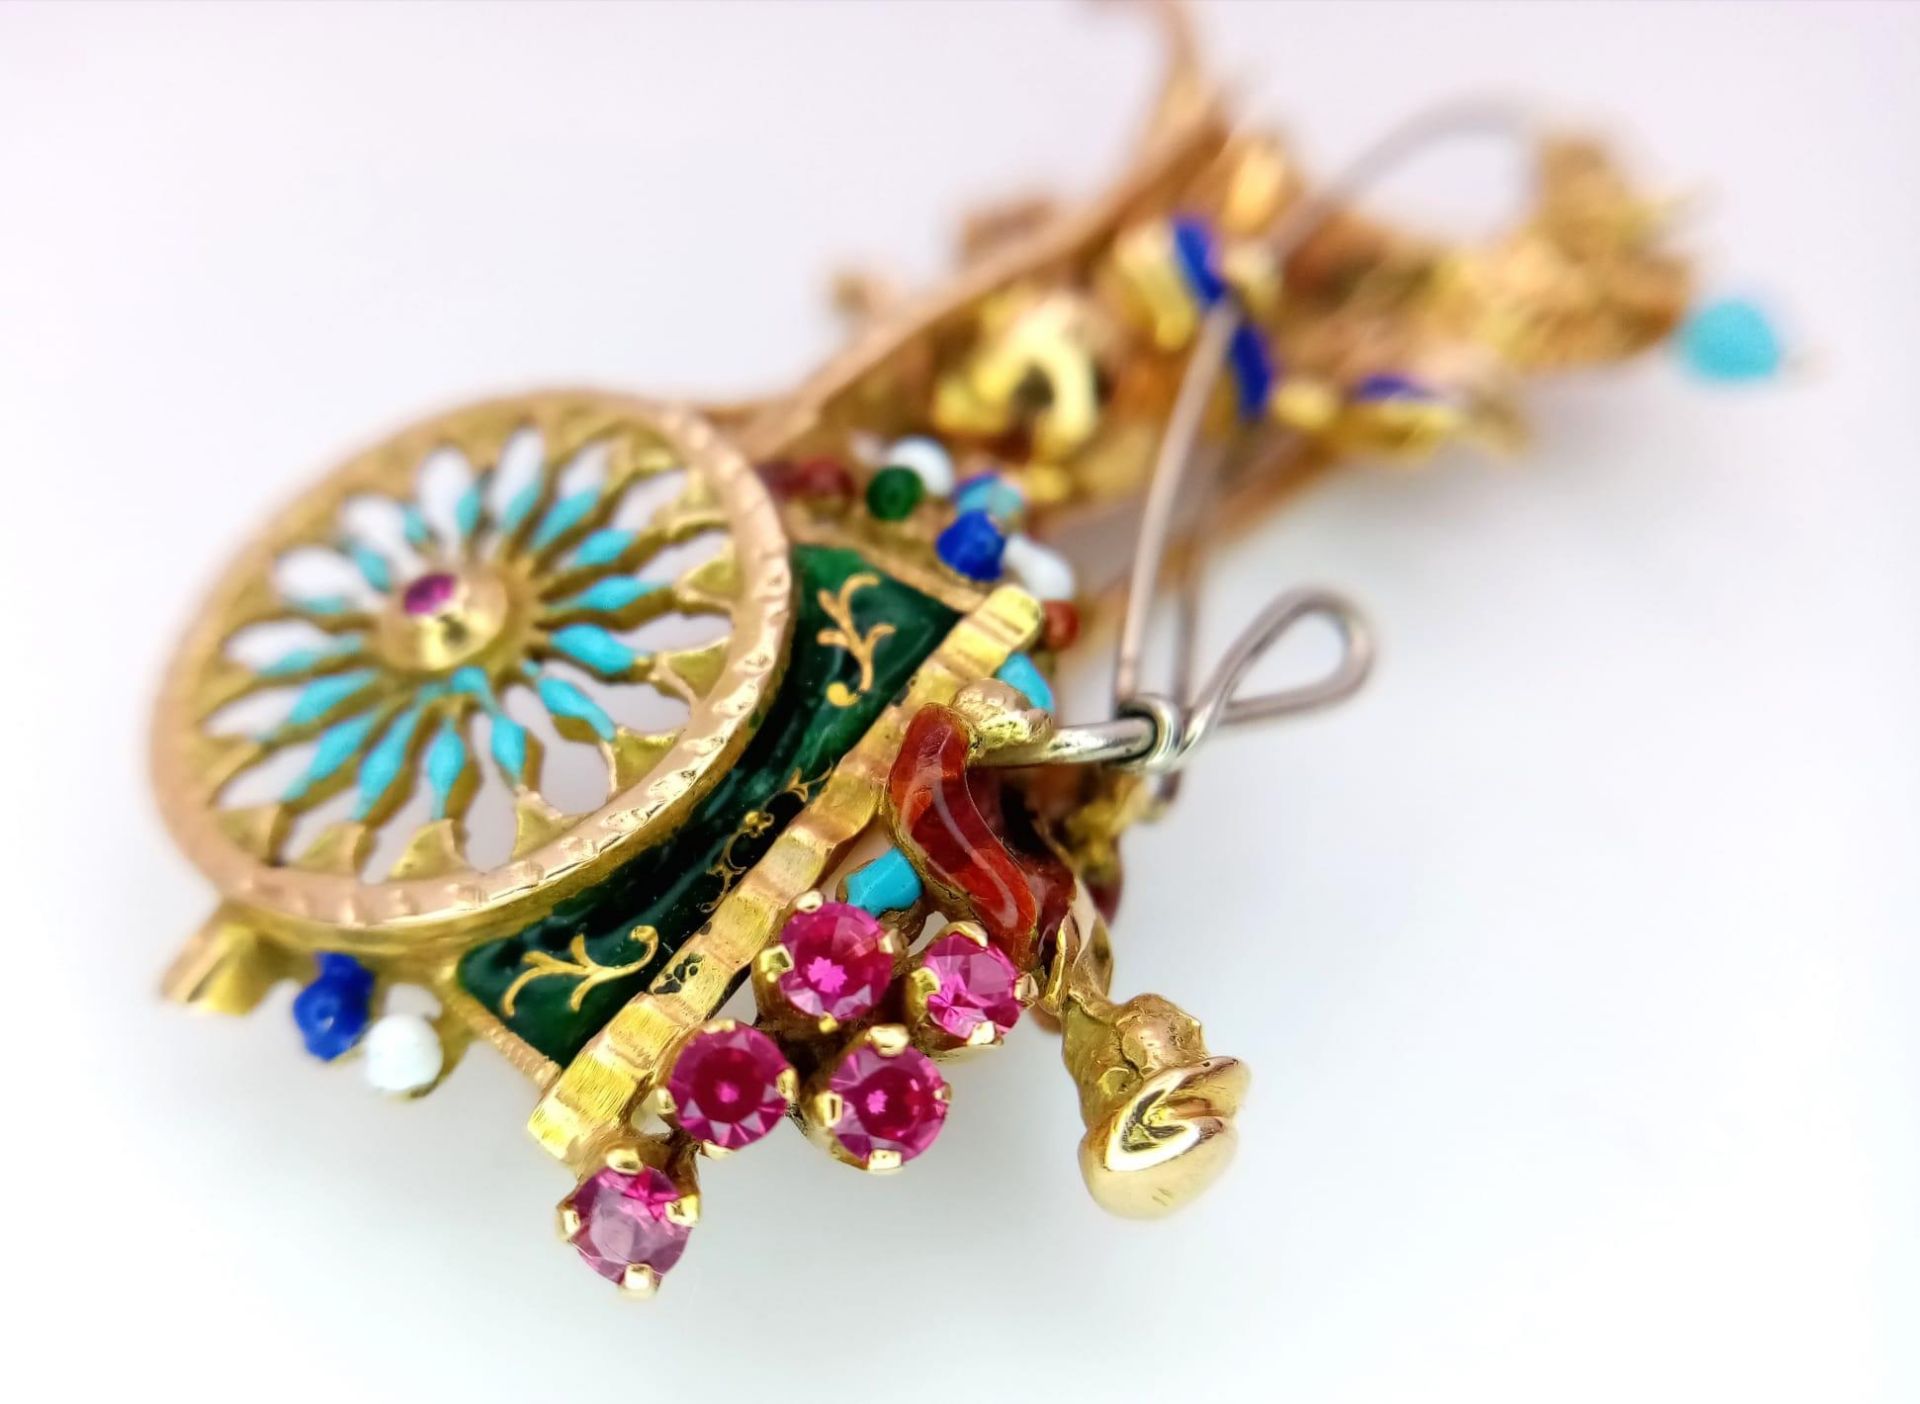 A Vintage 18K Yellow Gold Gemstone and Enamel Horse with Carriage Brooch. Incredible detail with - Image 4 of 8